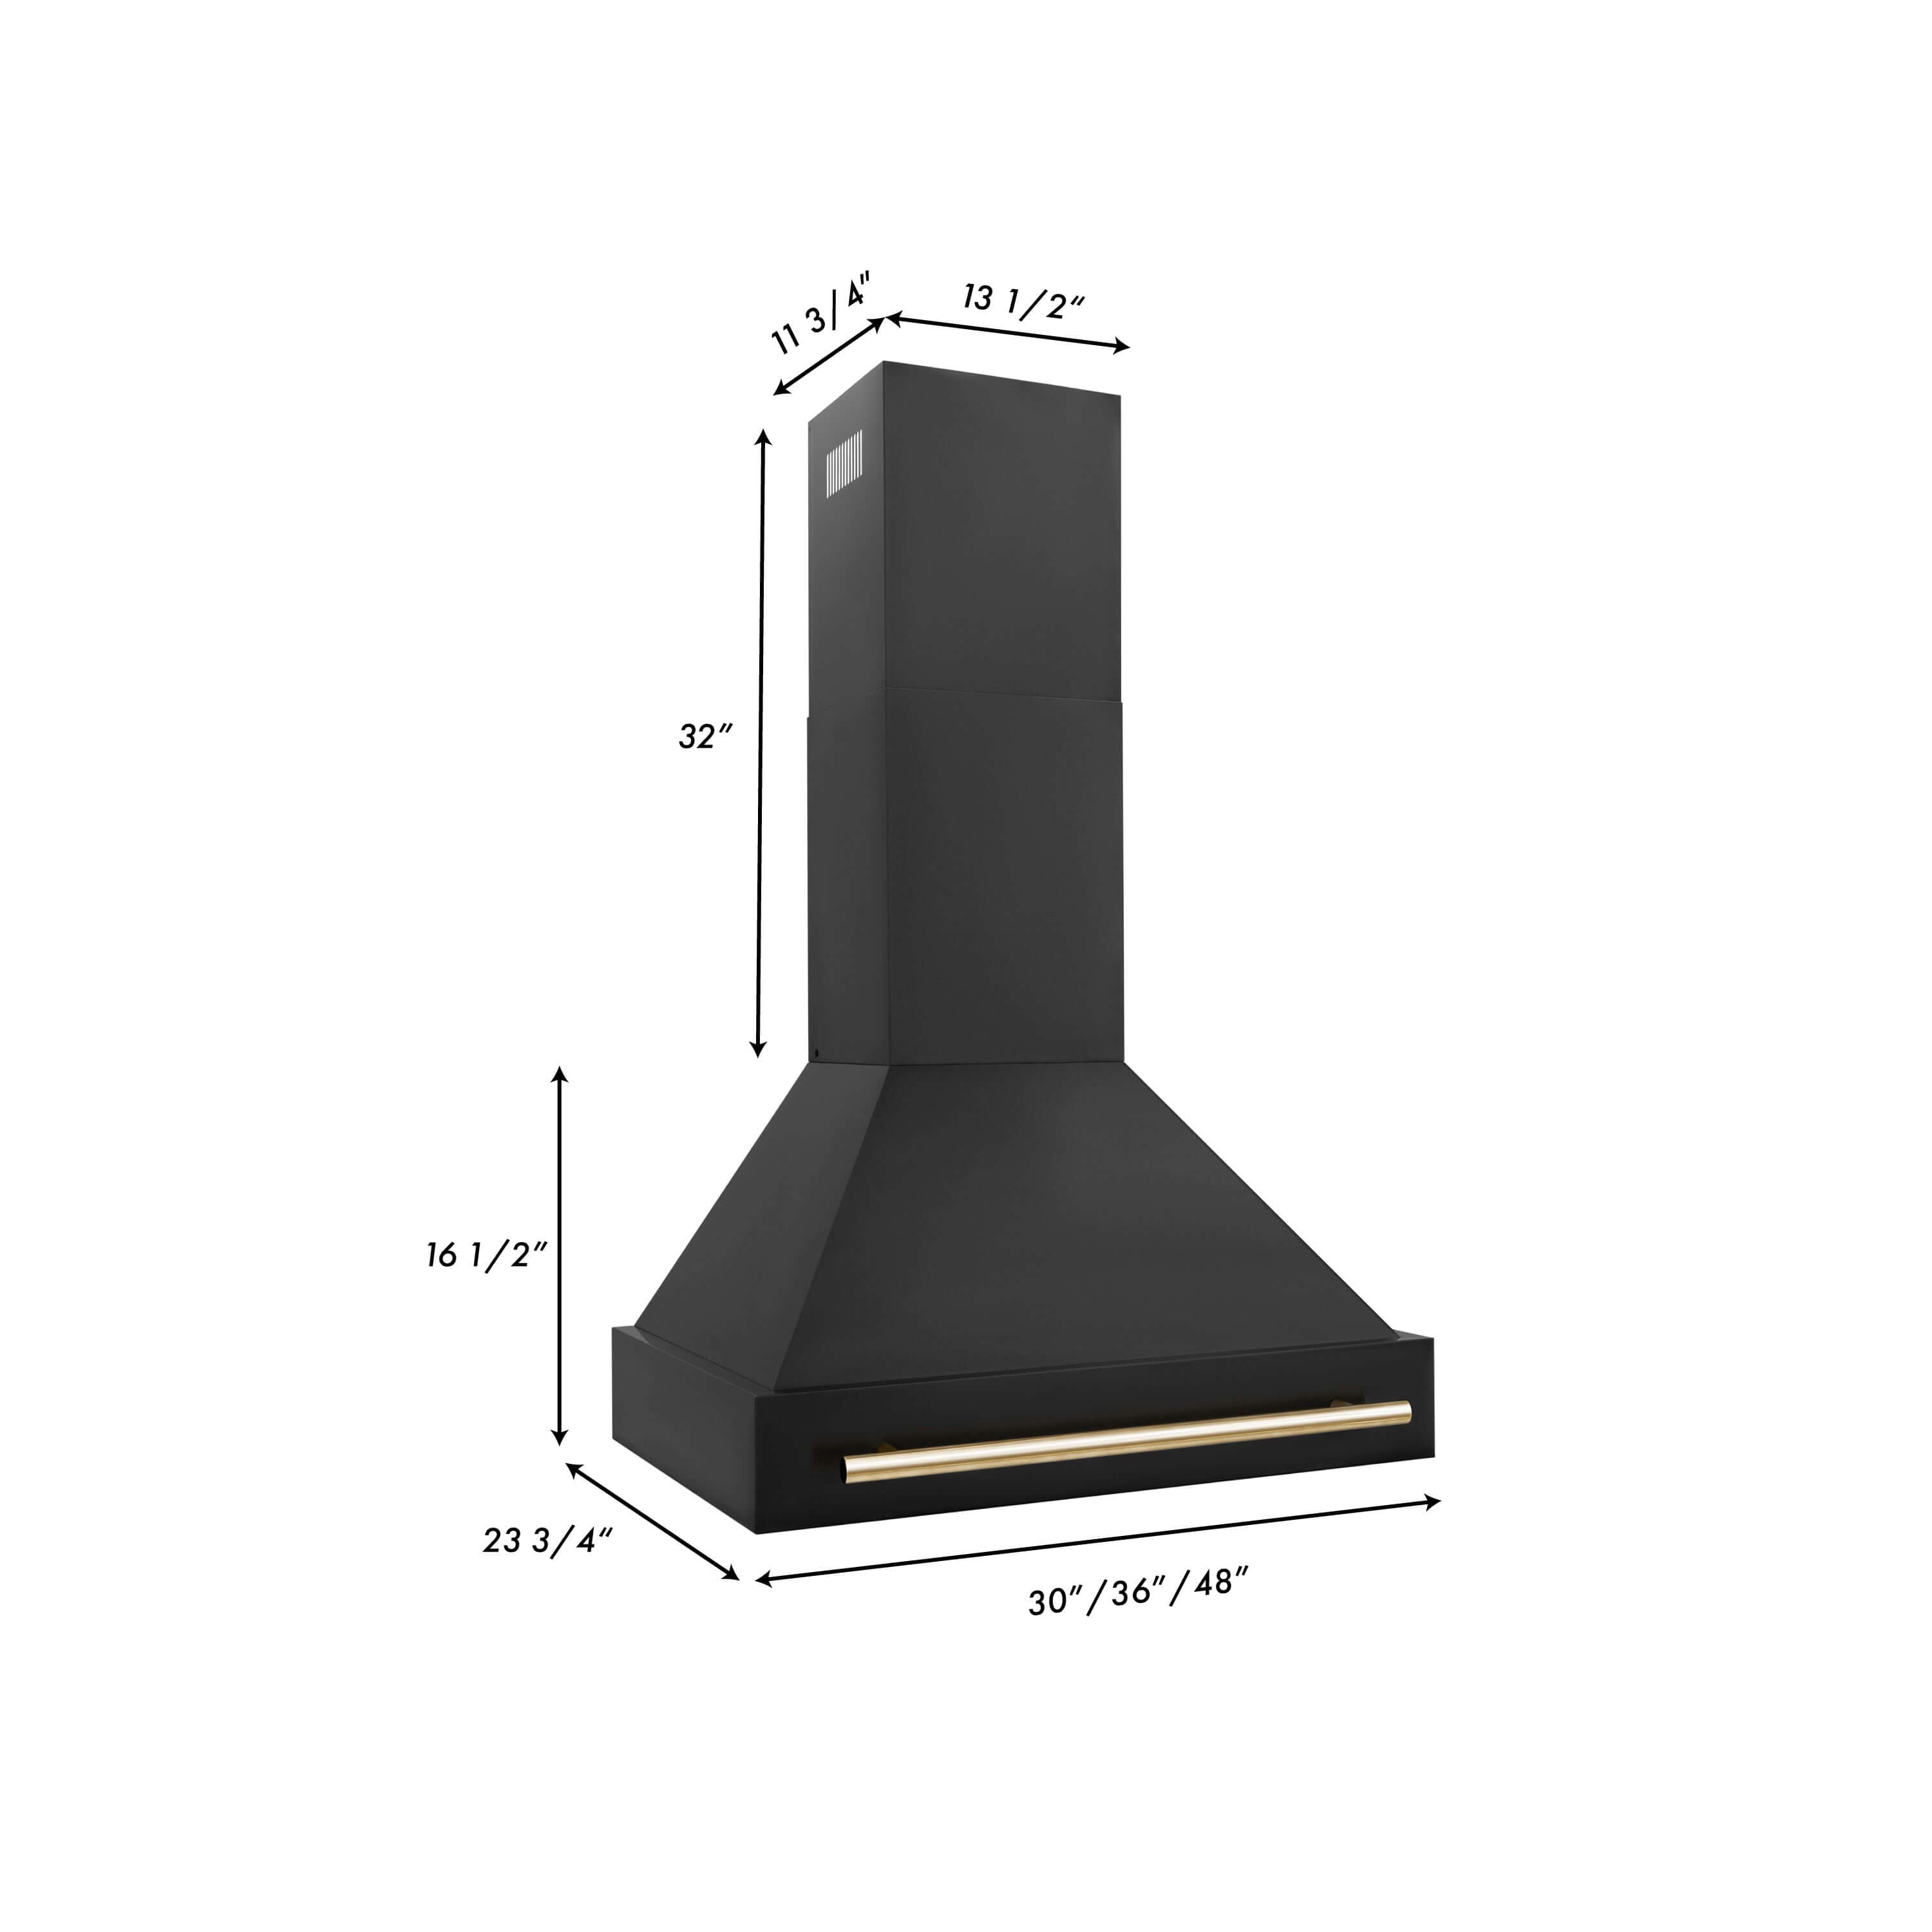 ZLINE 30" Black Stainless Steel Wall Mount Range Hood with Polished Gold accents dimensions.